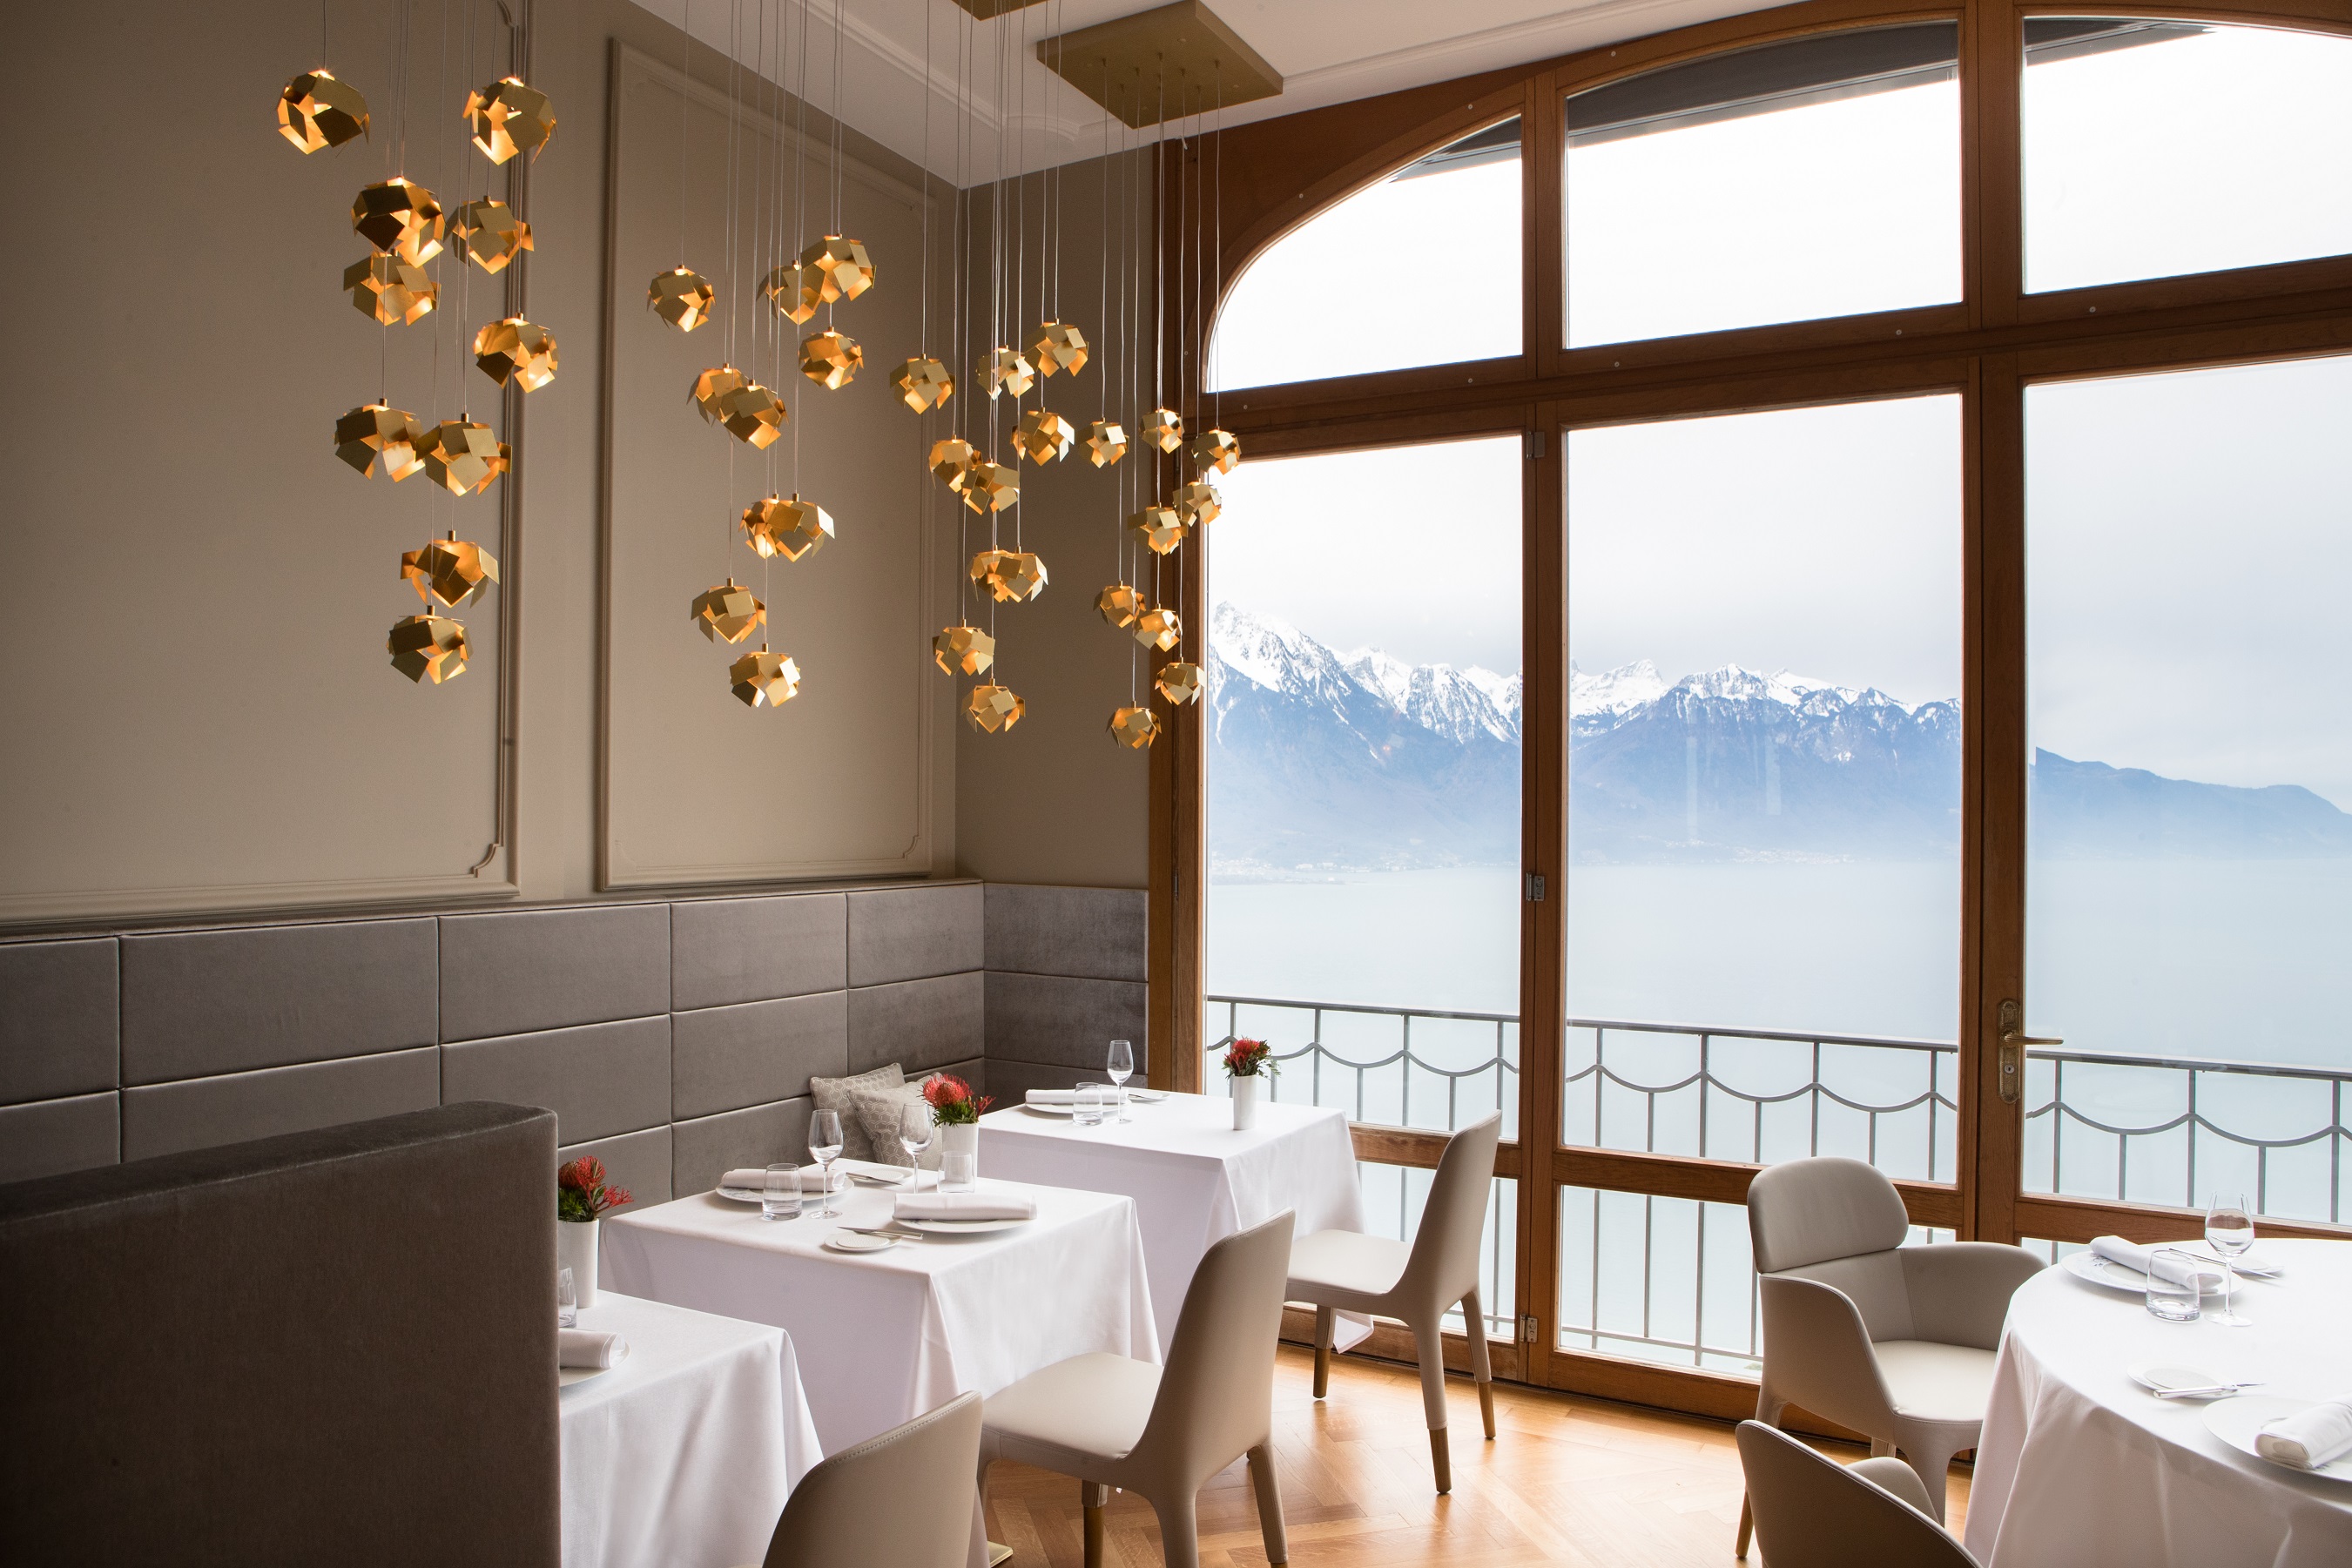 Glion’s studentoperated gastronomic restaurant Le Bellevue awarded 16